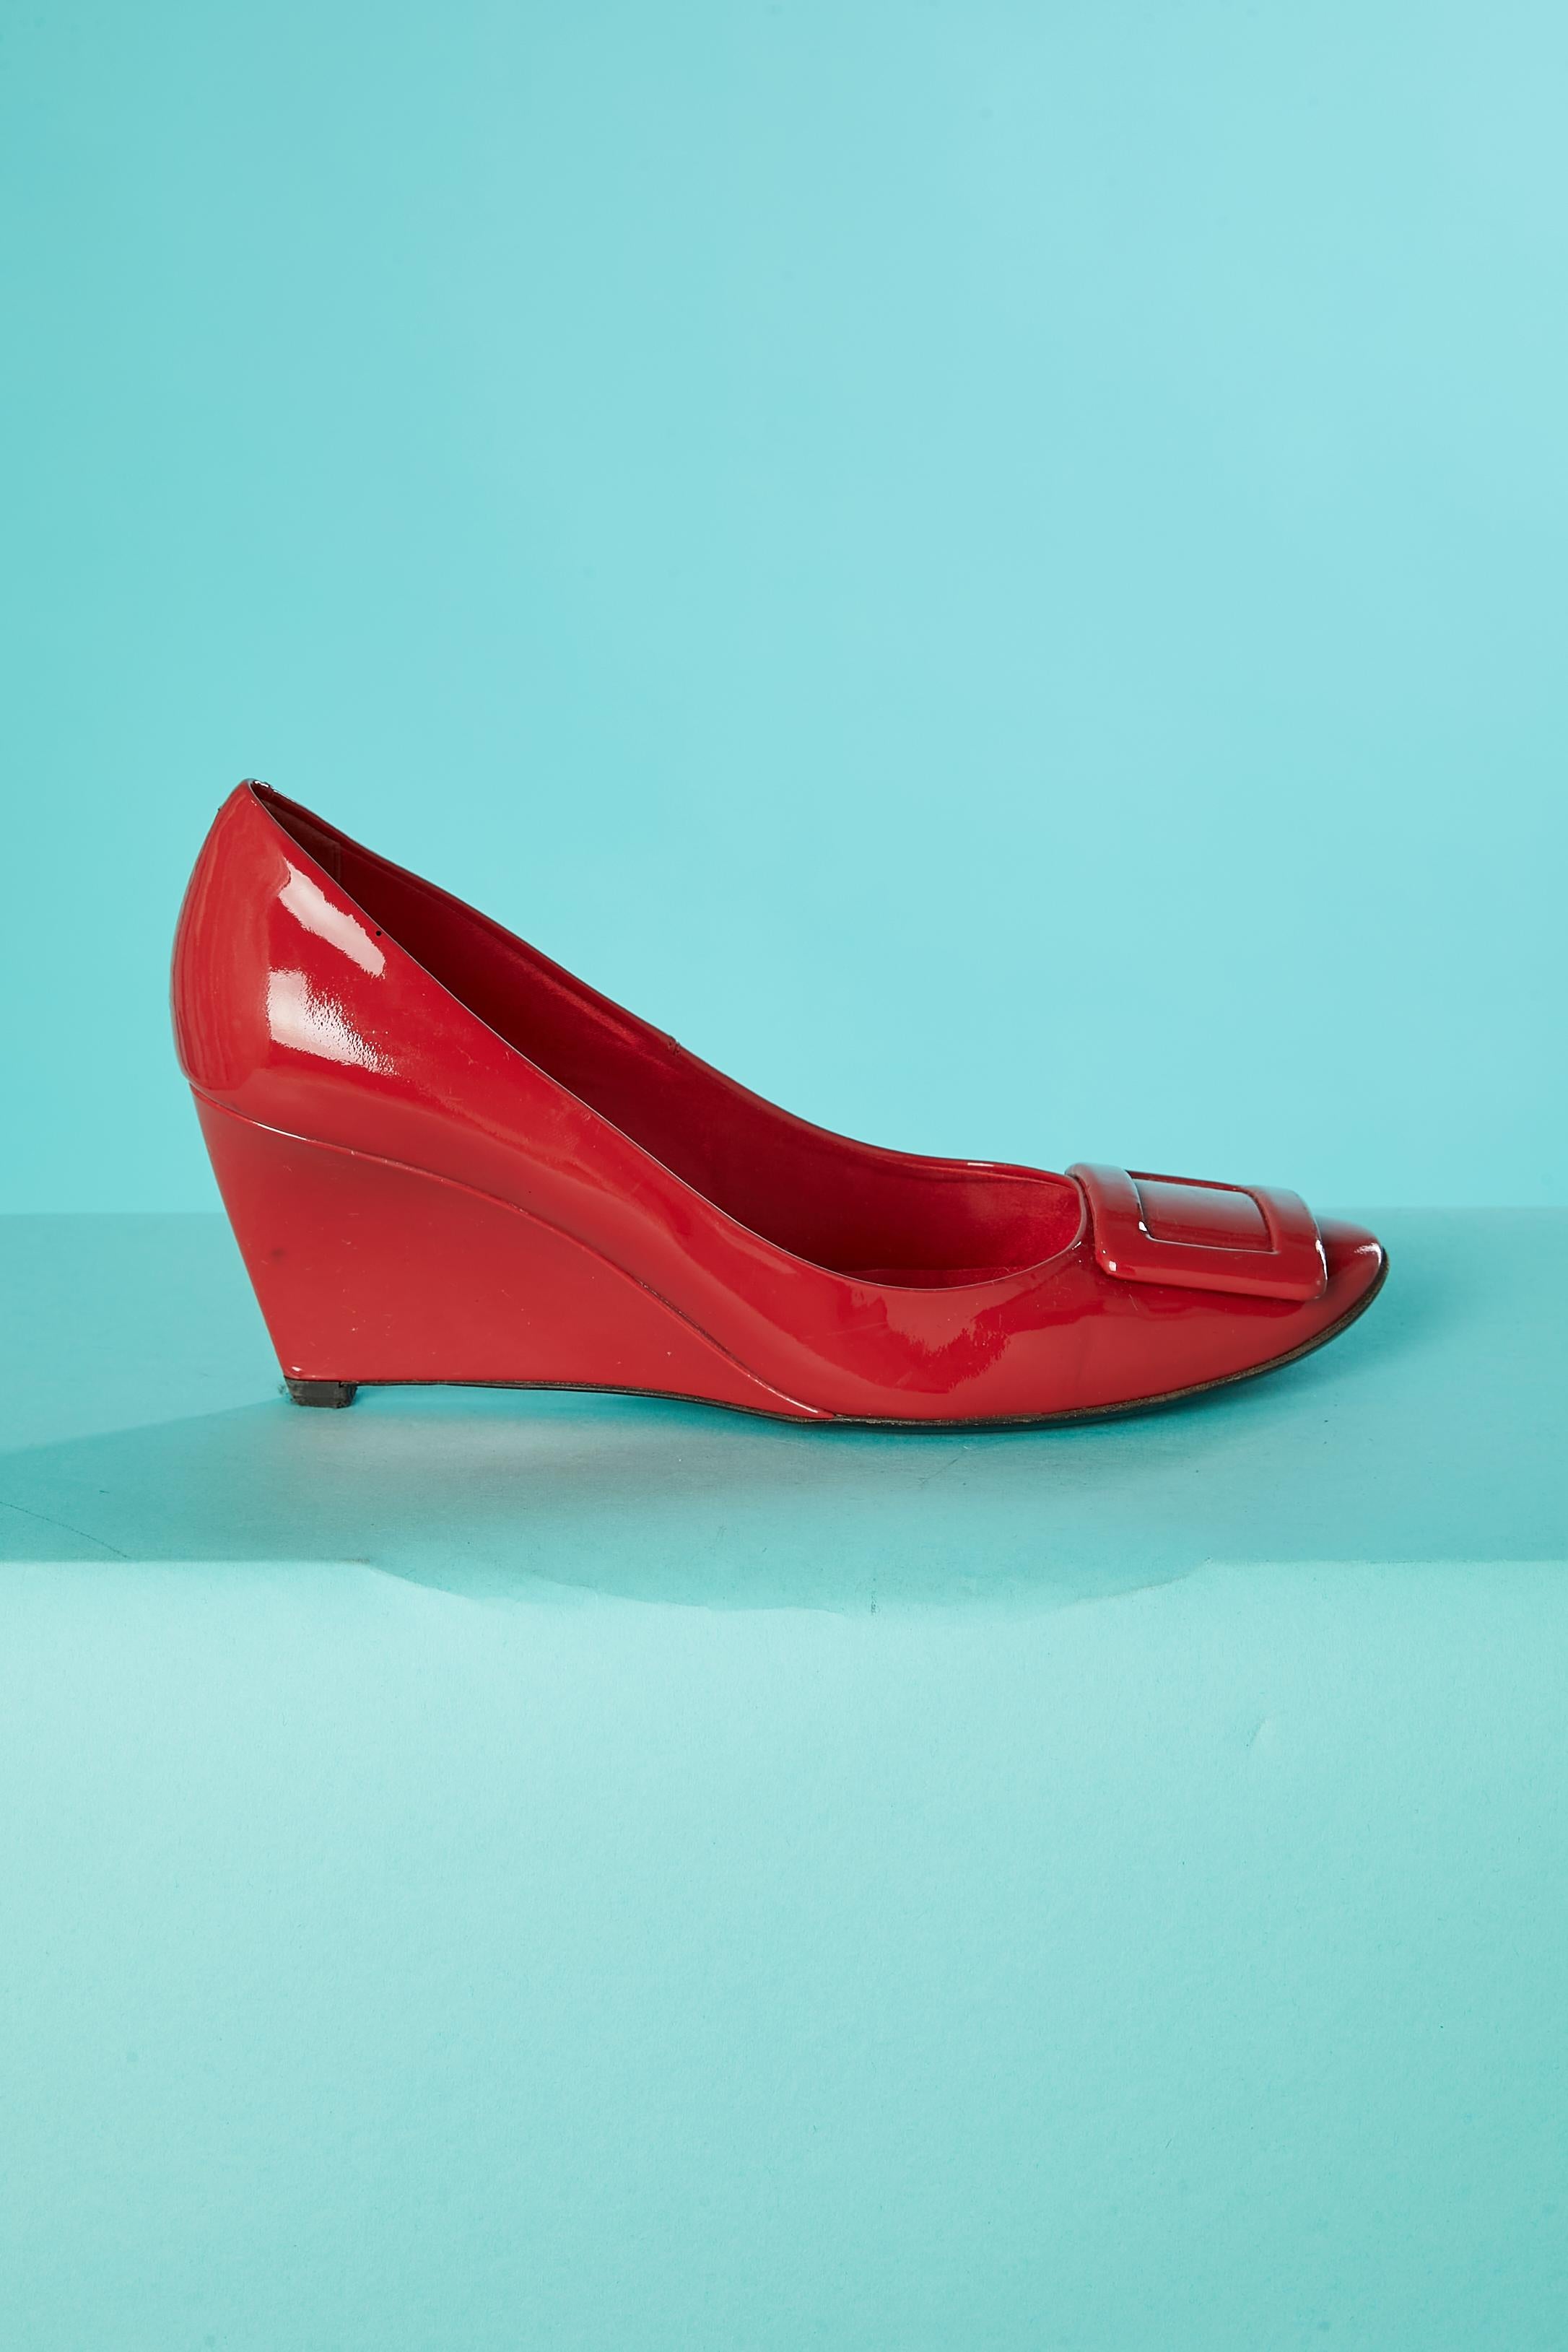 Red patent leather wedge pump with red buckle. 
Heels height : 6,5 cm
Shoes SIZE : 38,5 (Eu) 7 (Us) 